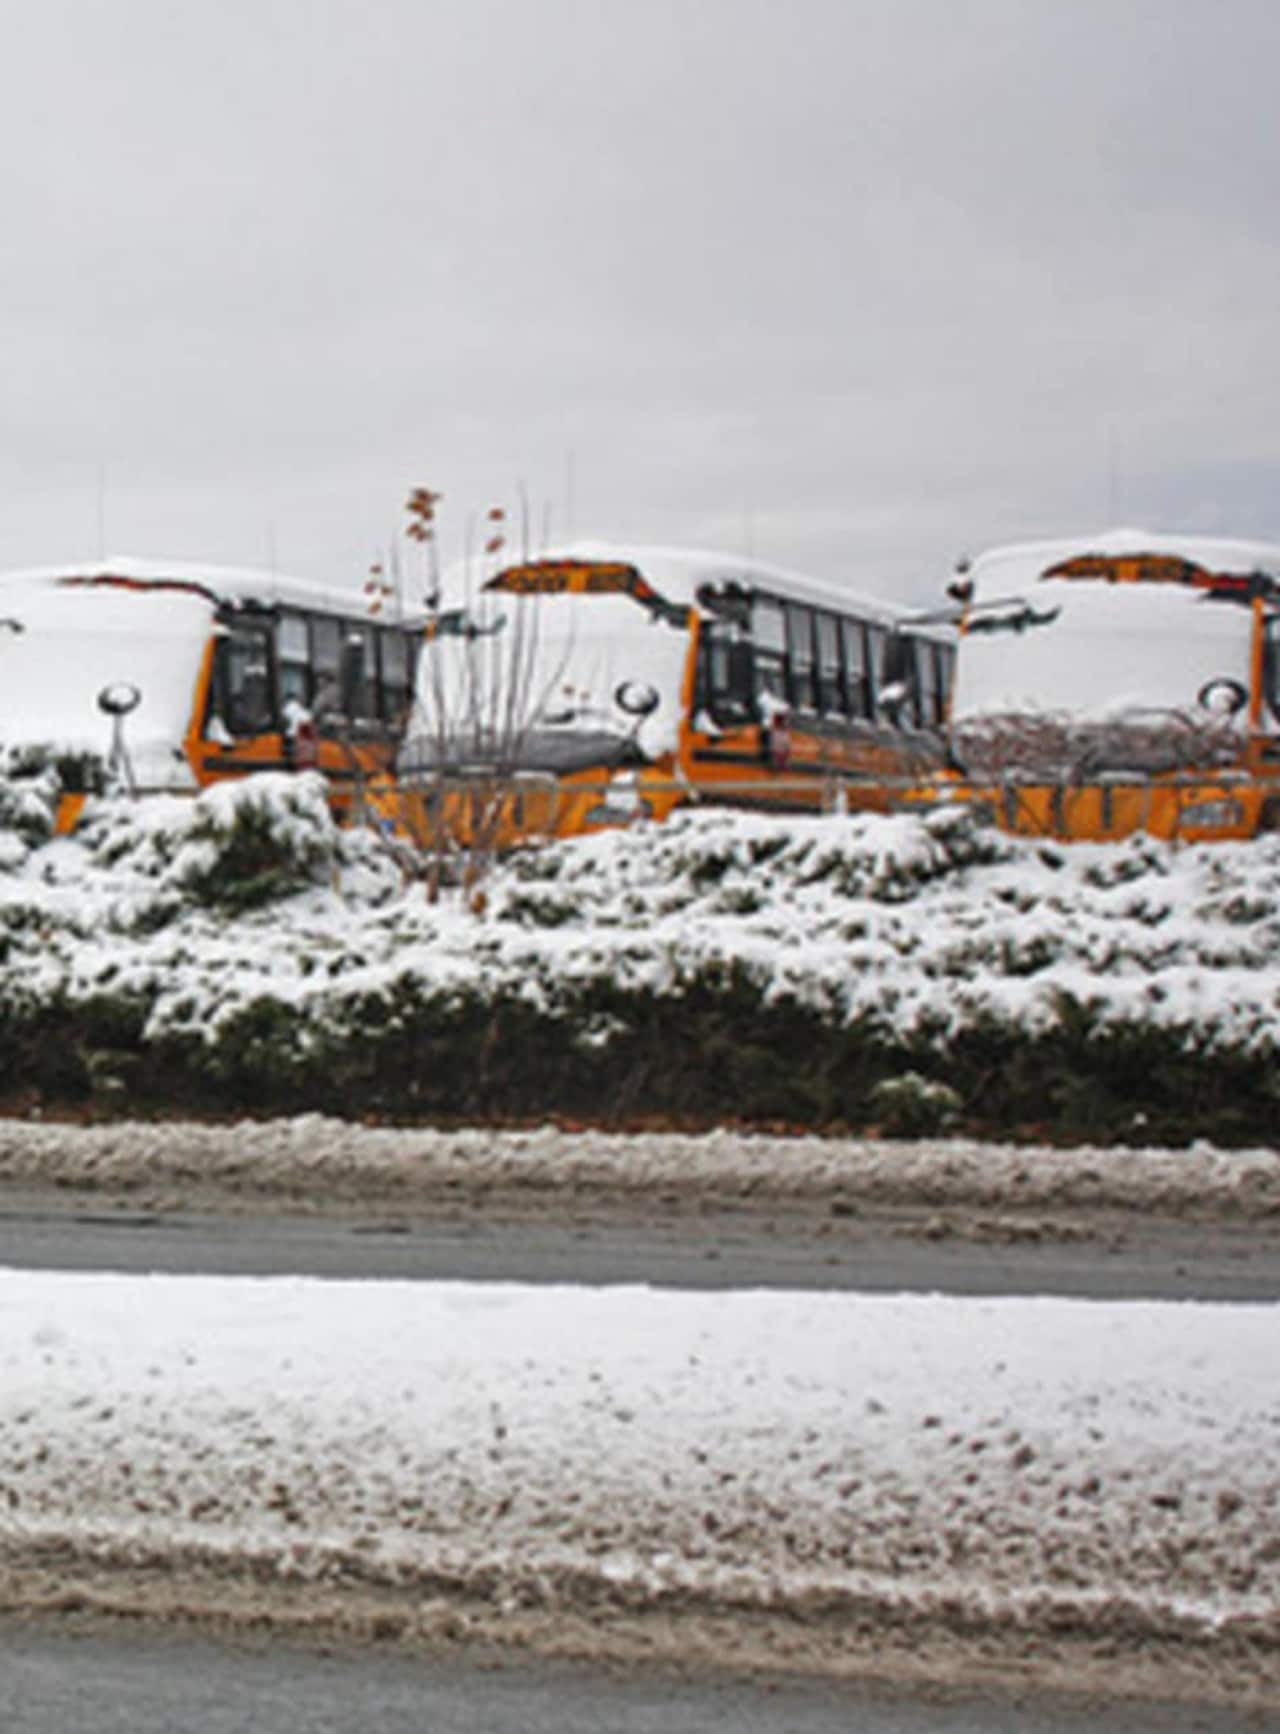 School buses in the snow.